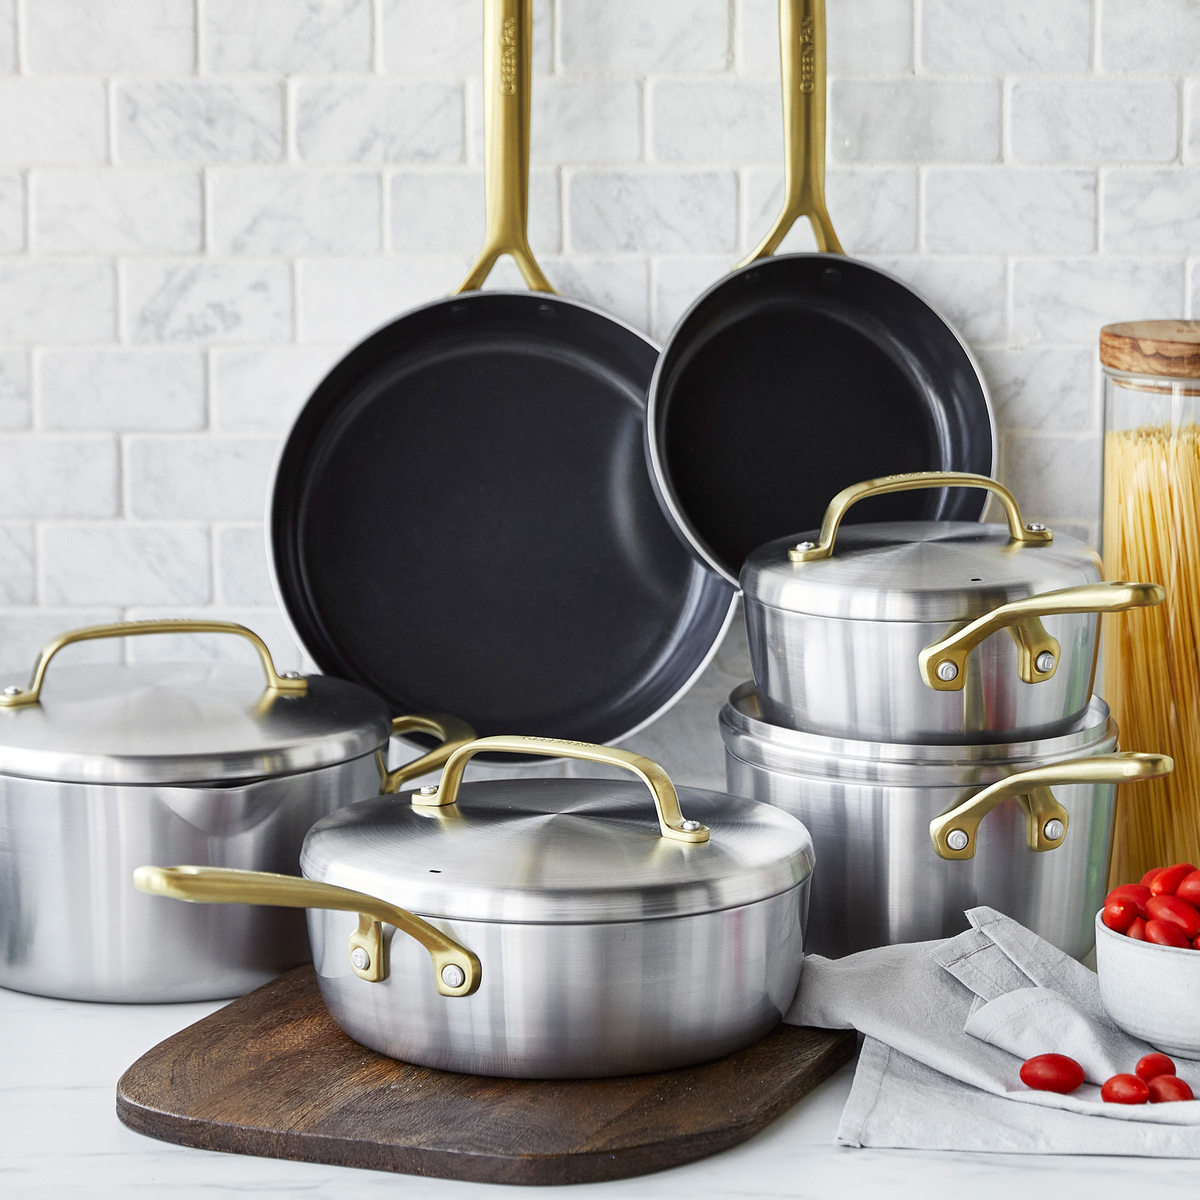 Taupe Reserve Ceramic Nonstick 10-Piece Cookware Set - The Peppermill